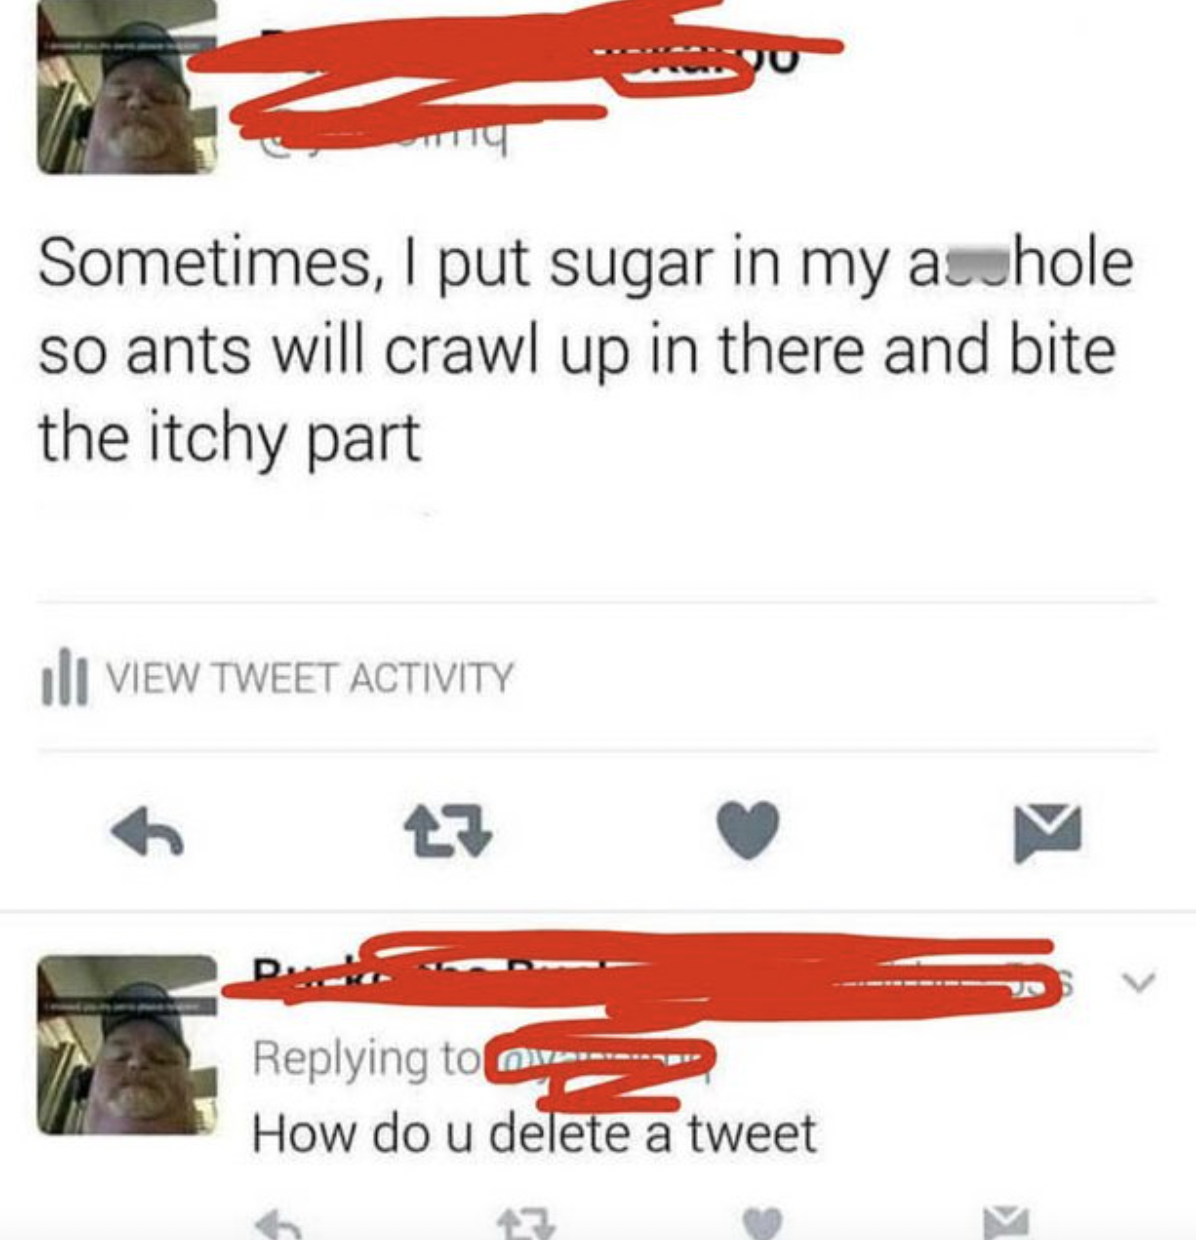 Cringey Pics - paper - Sometimes, I put sugar in my asshole so ants will crawl up in there and bite the itchy part View Tweet Activity 27 How do u delete a tweet